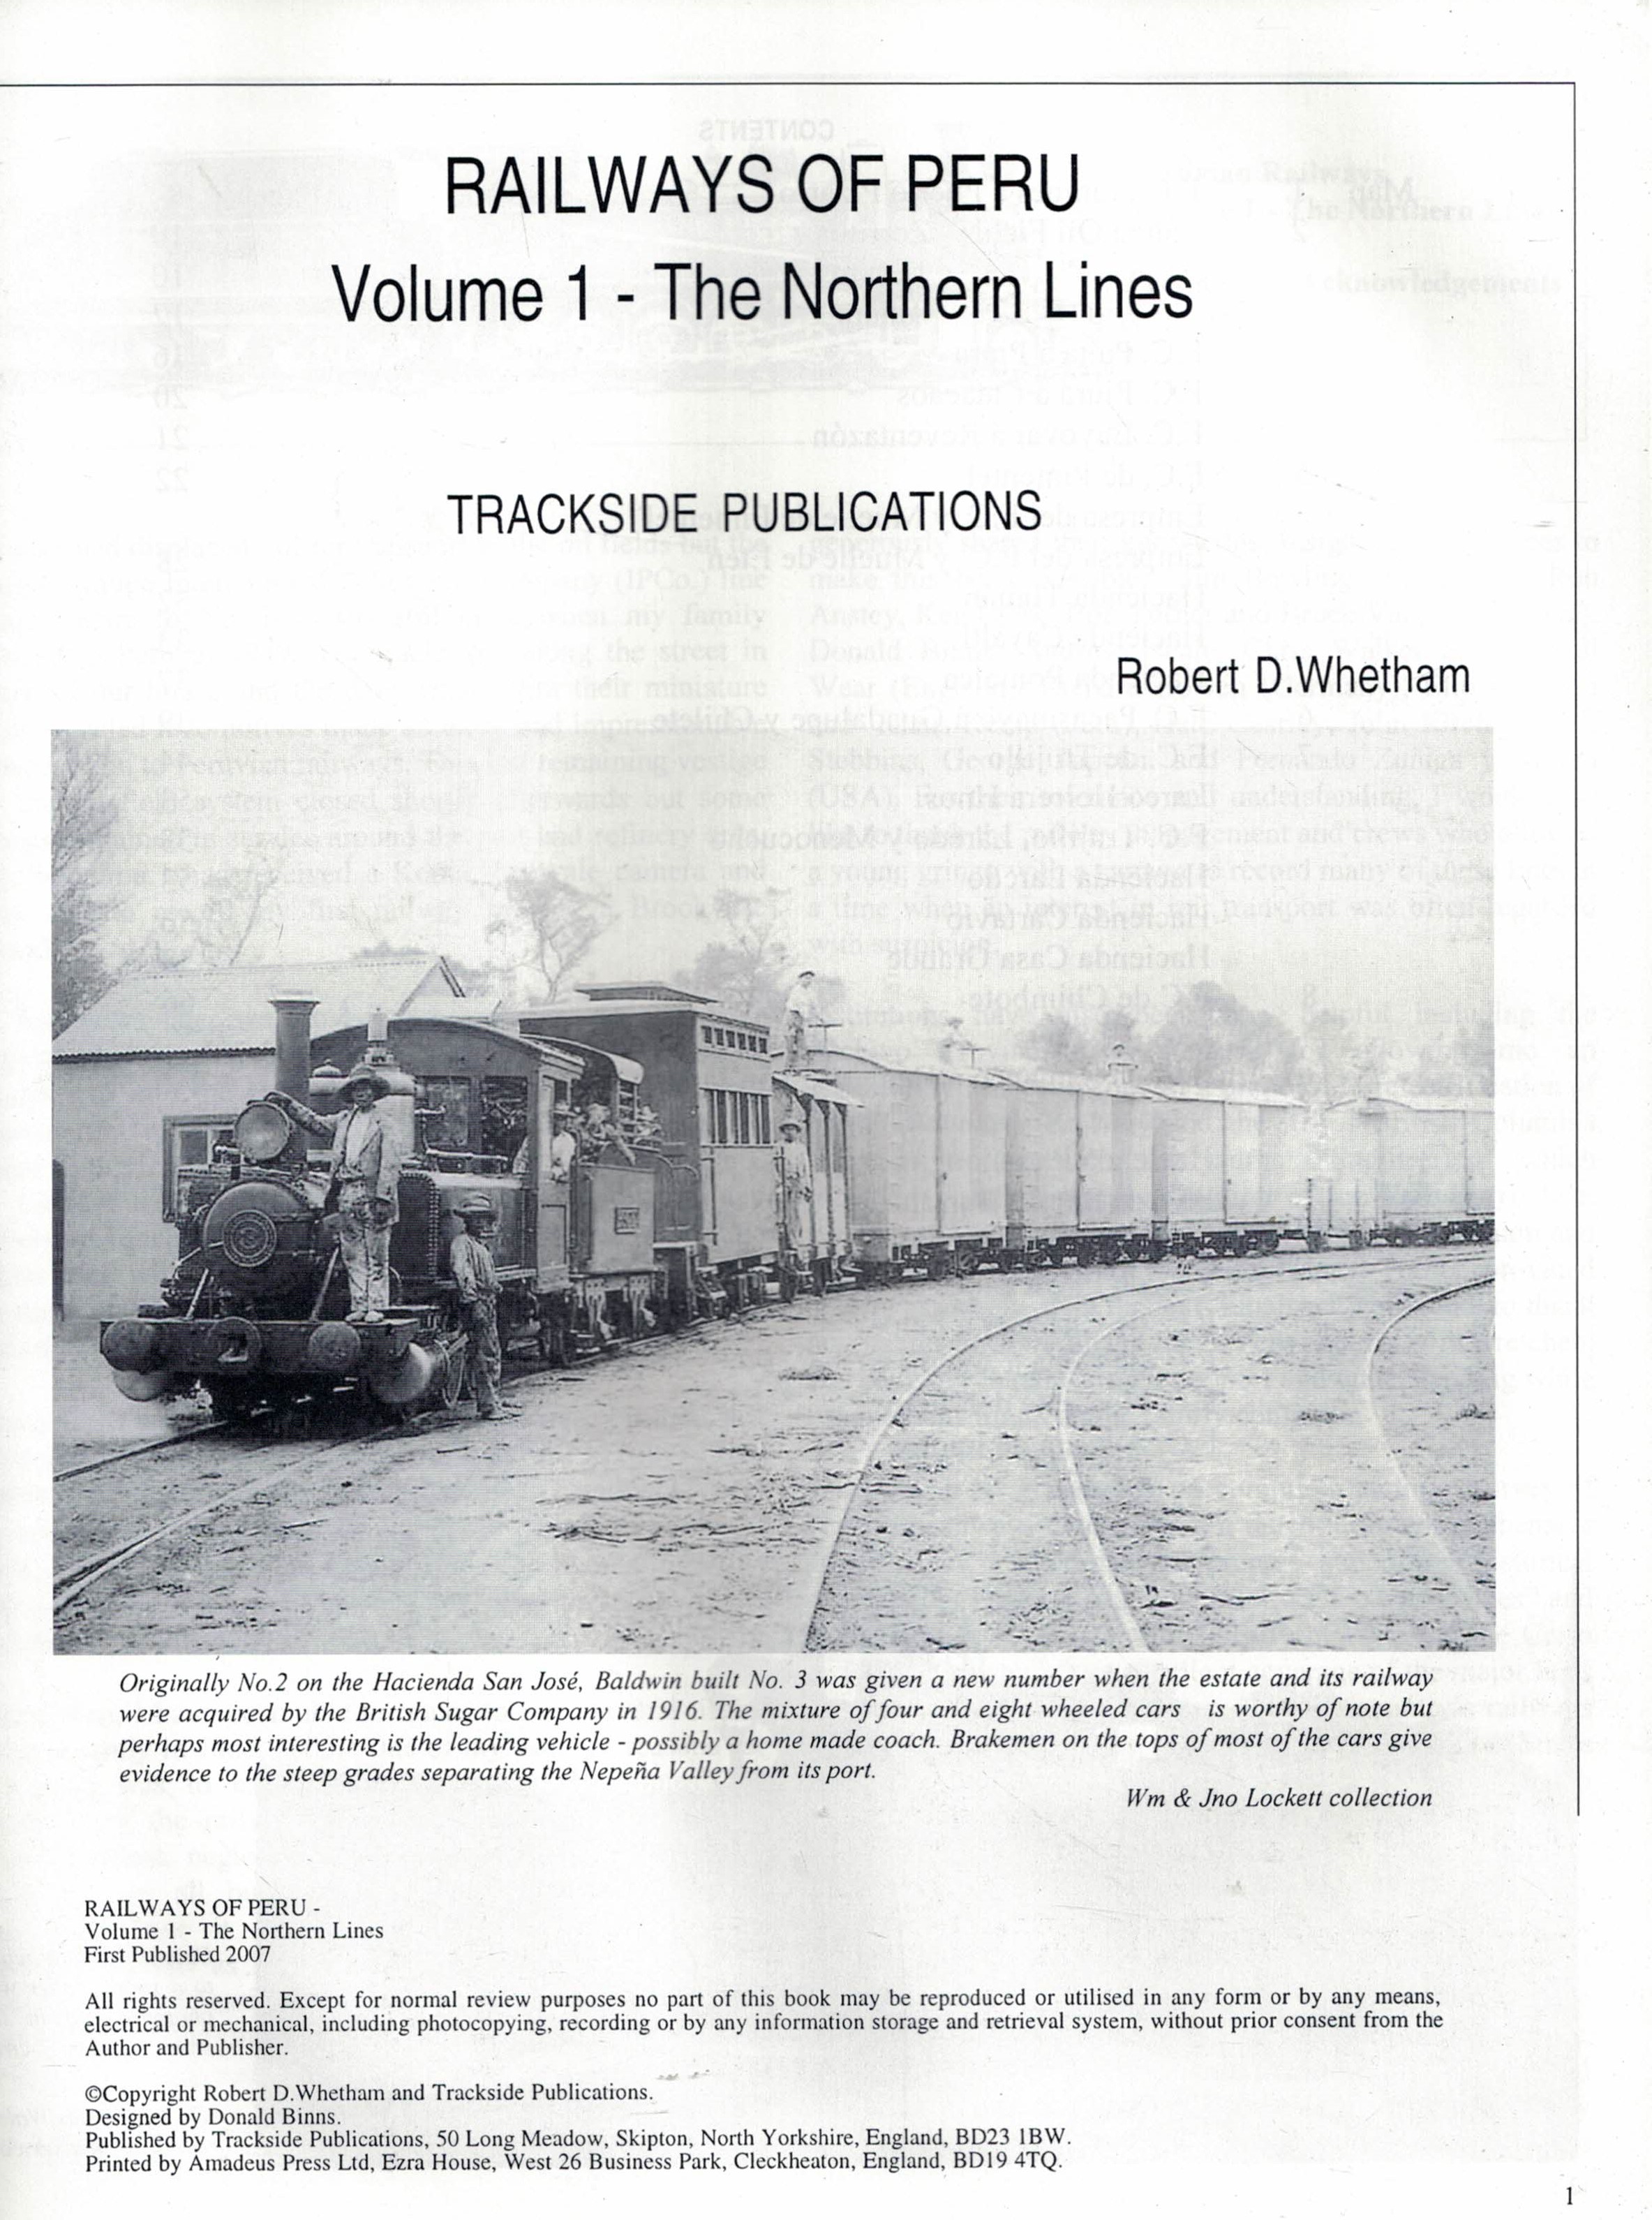 Railways of Peru. 2 volume set: The Northern Lines + The Central and Southern Lines.